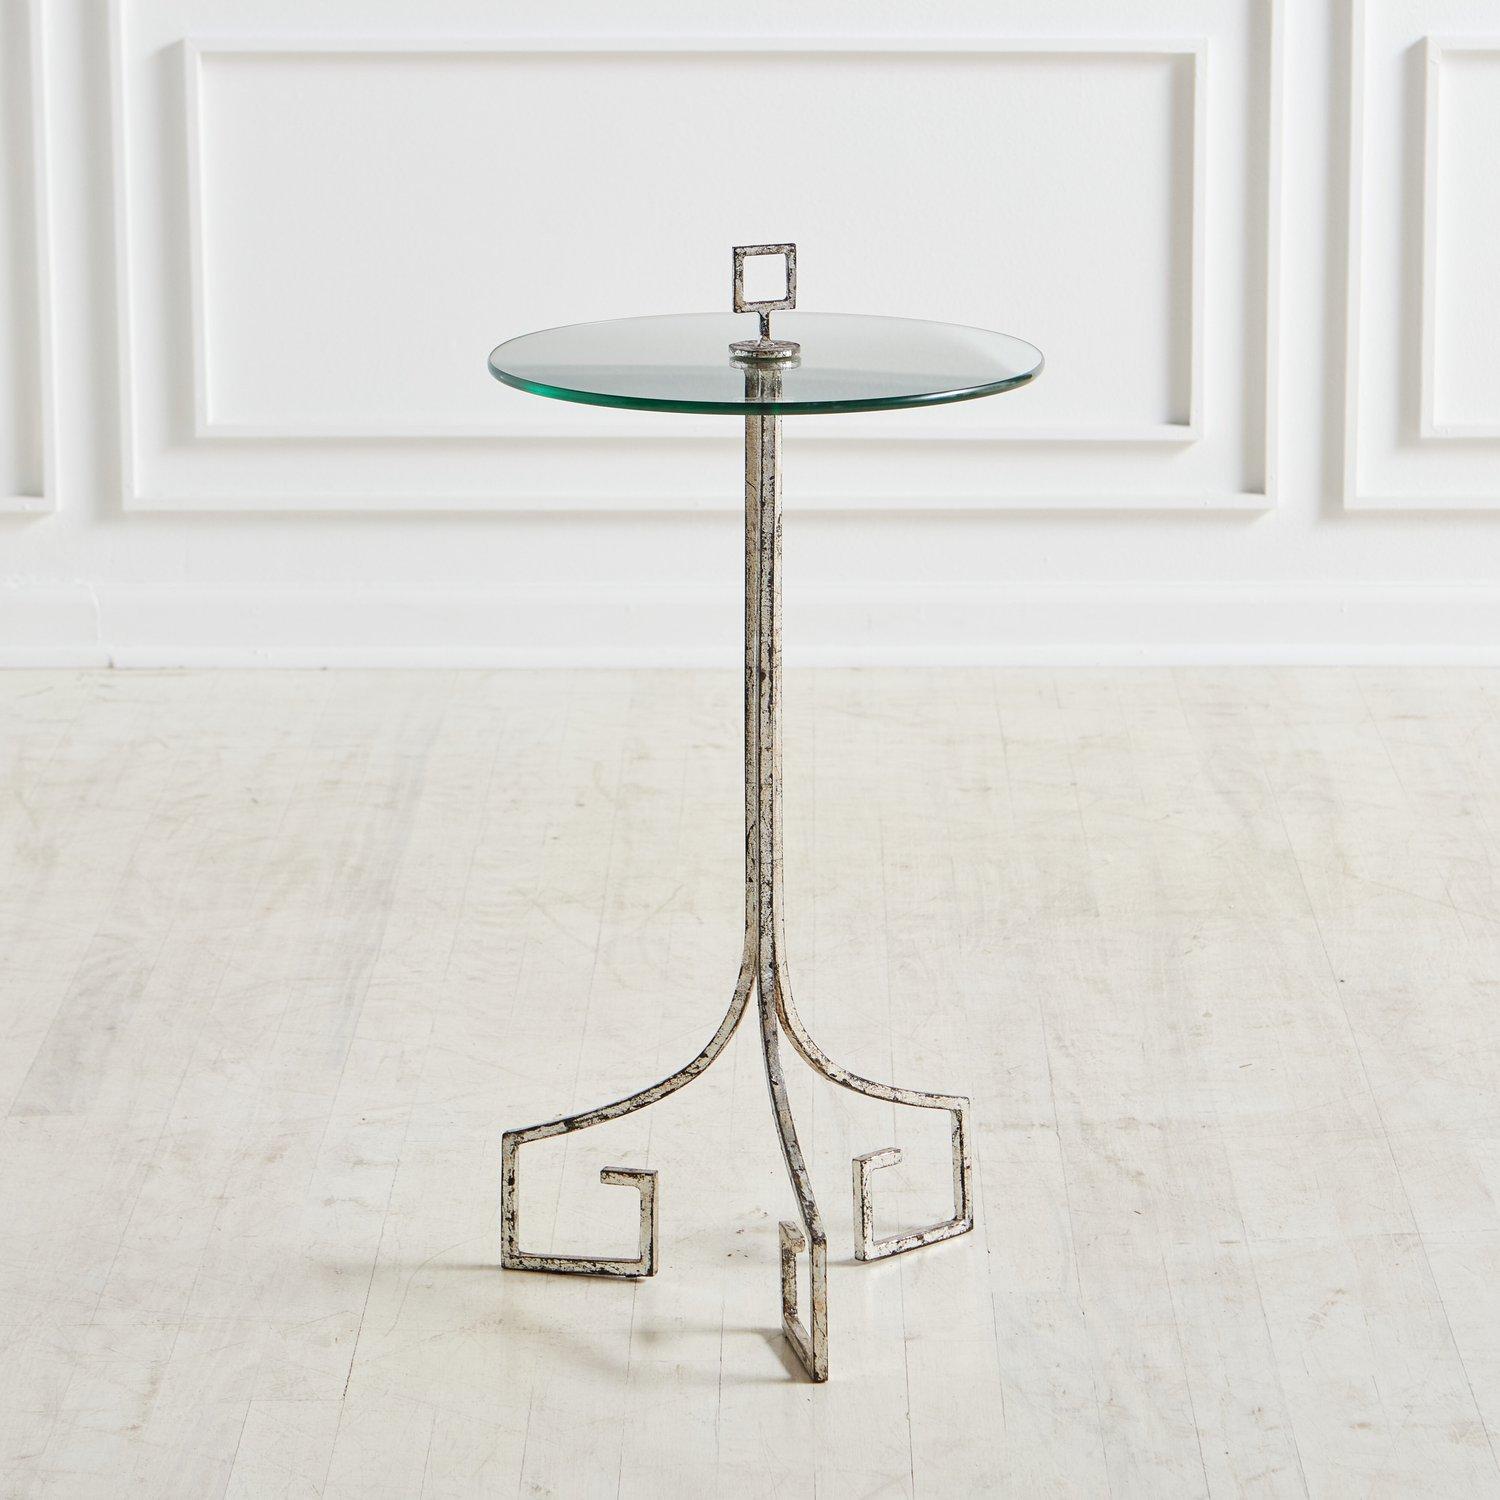 A beautiful mid-century occasional table featuring an angular tripod metal base with a .375” thick circular glass table top. The metal base has a hand applied silver leaf finish and the table top is held in place by a square handle, making it easy